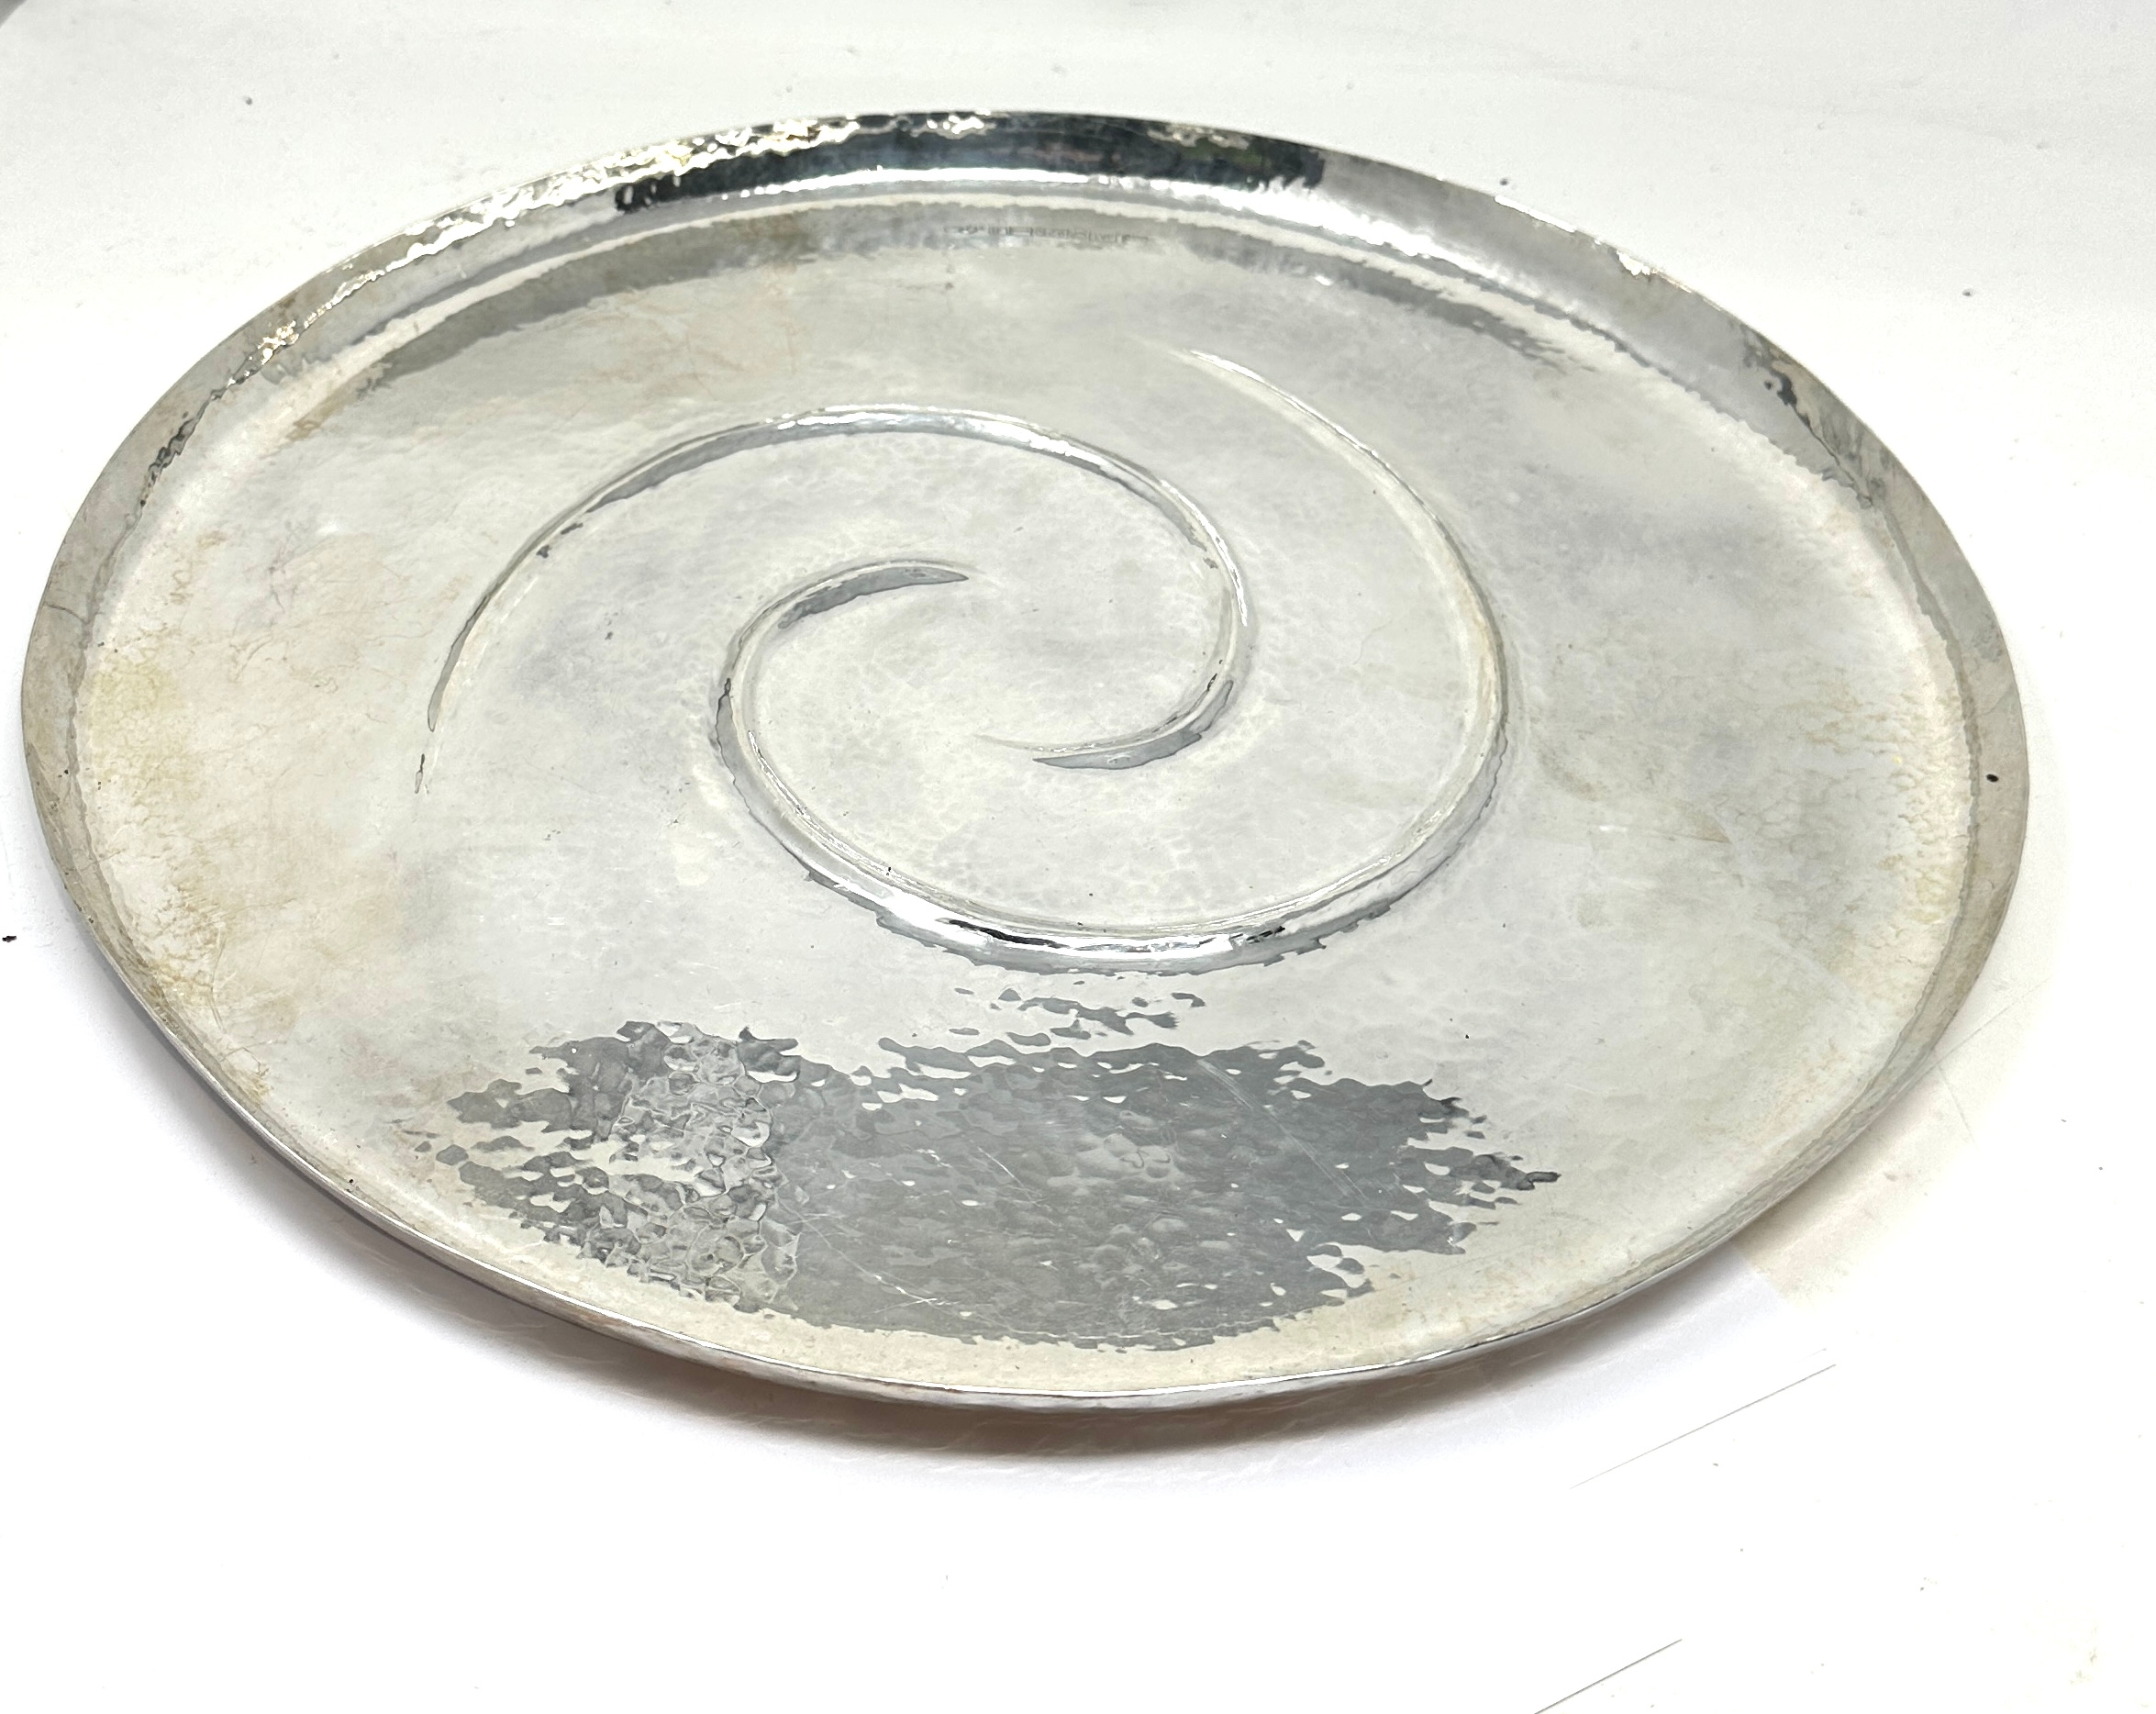 Large 1988 modernist design finnish silver tray measures approx 40cm dia weight 1201g